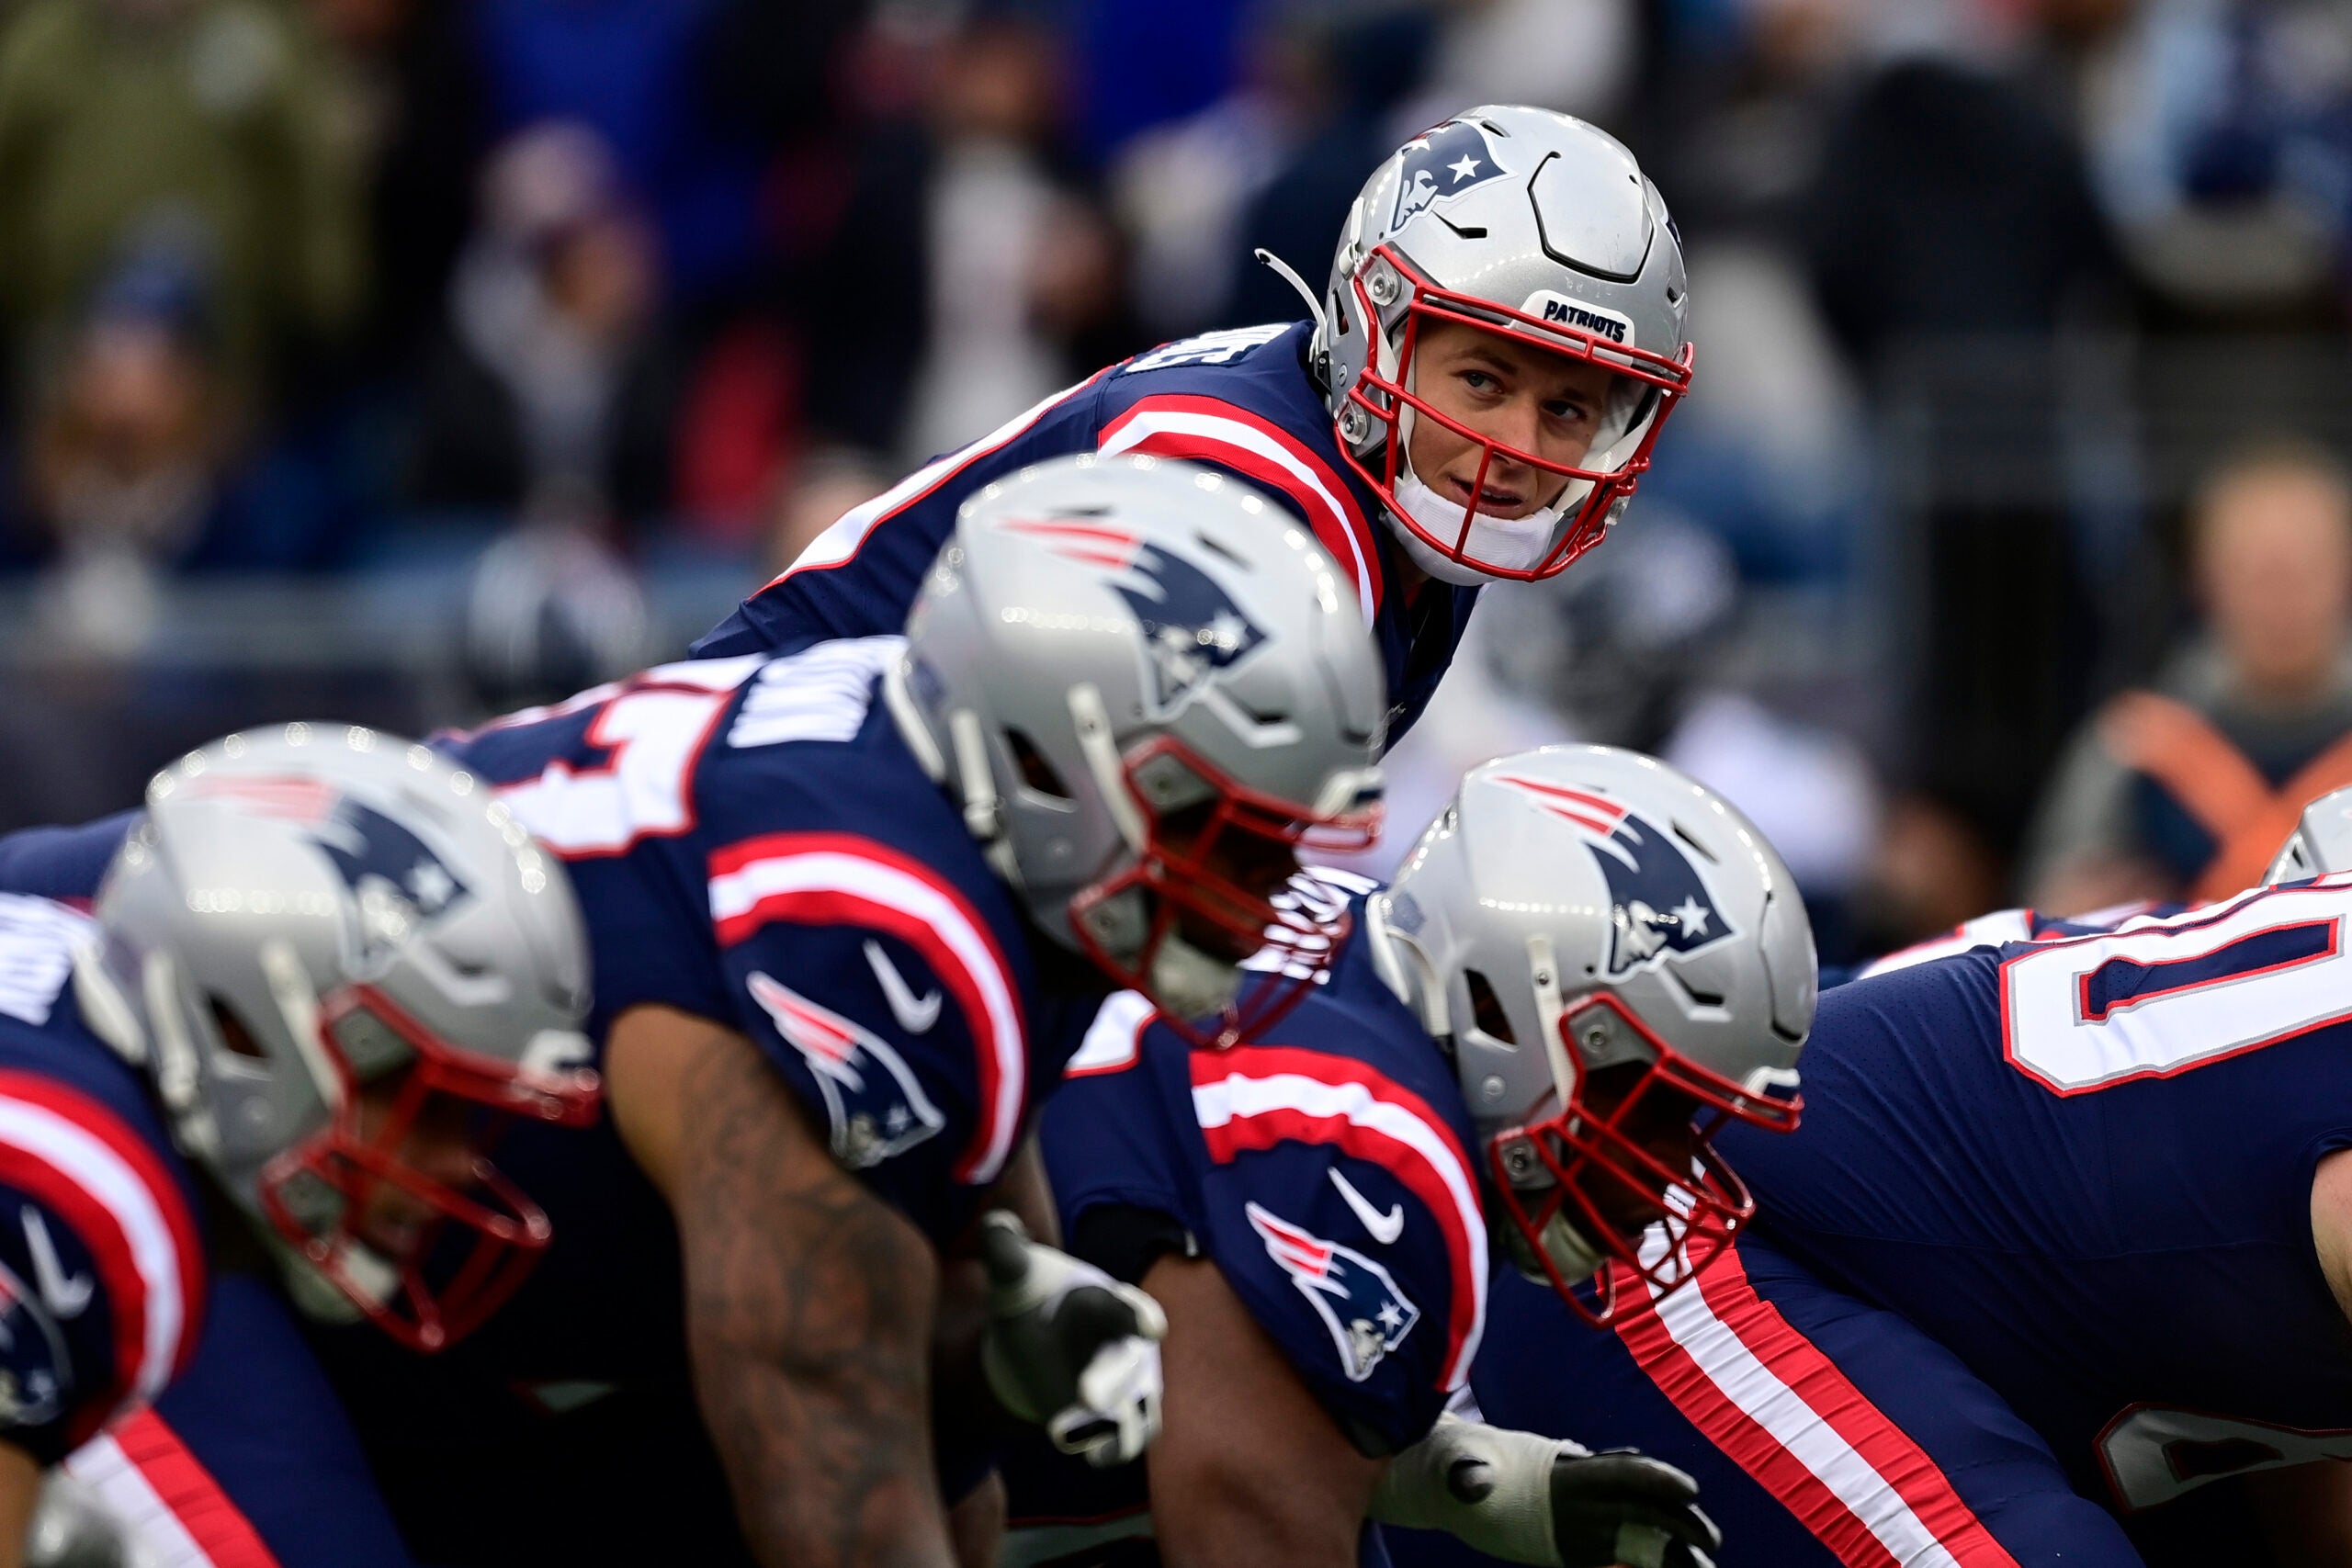 Patriots officially hold No. 1 seed in AFC prior to game vs. Bills